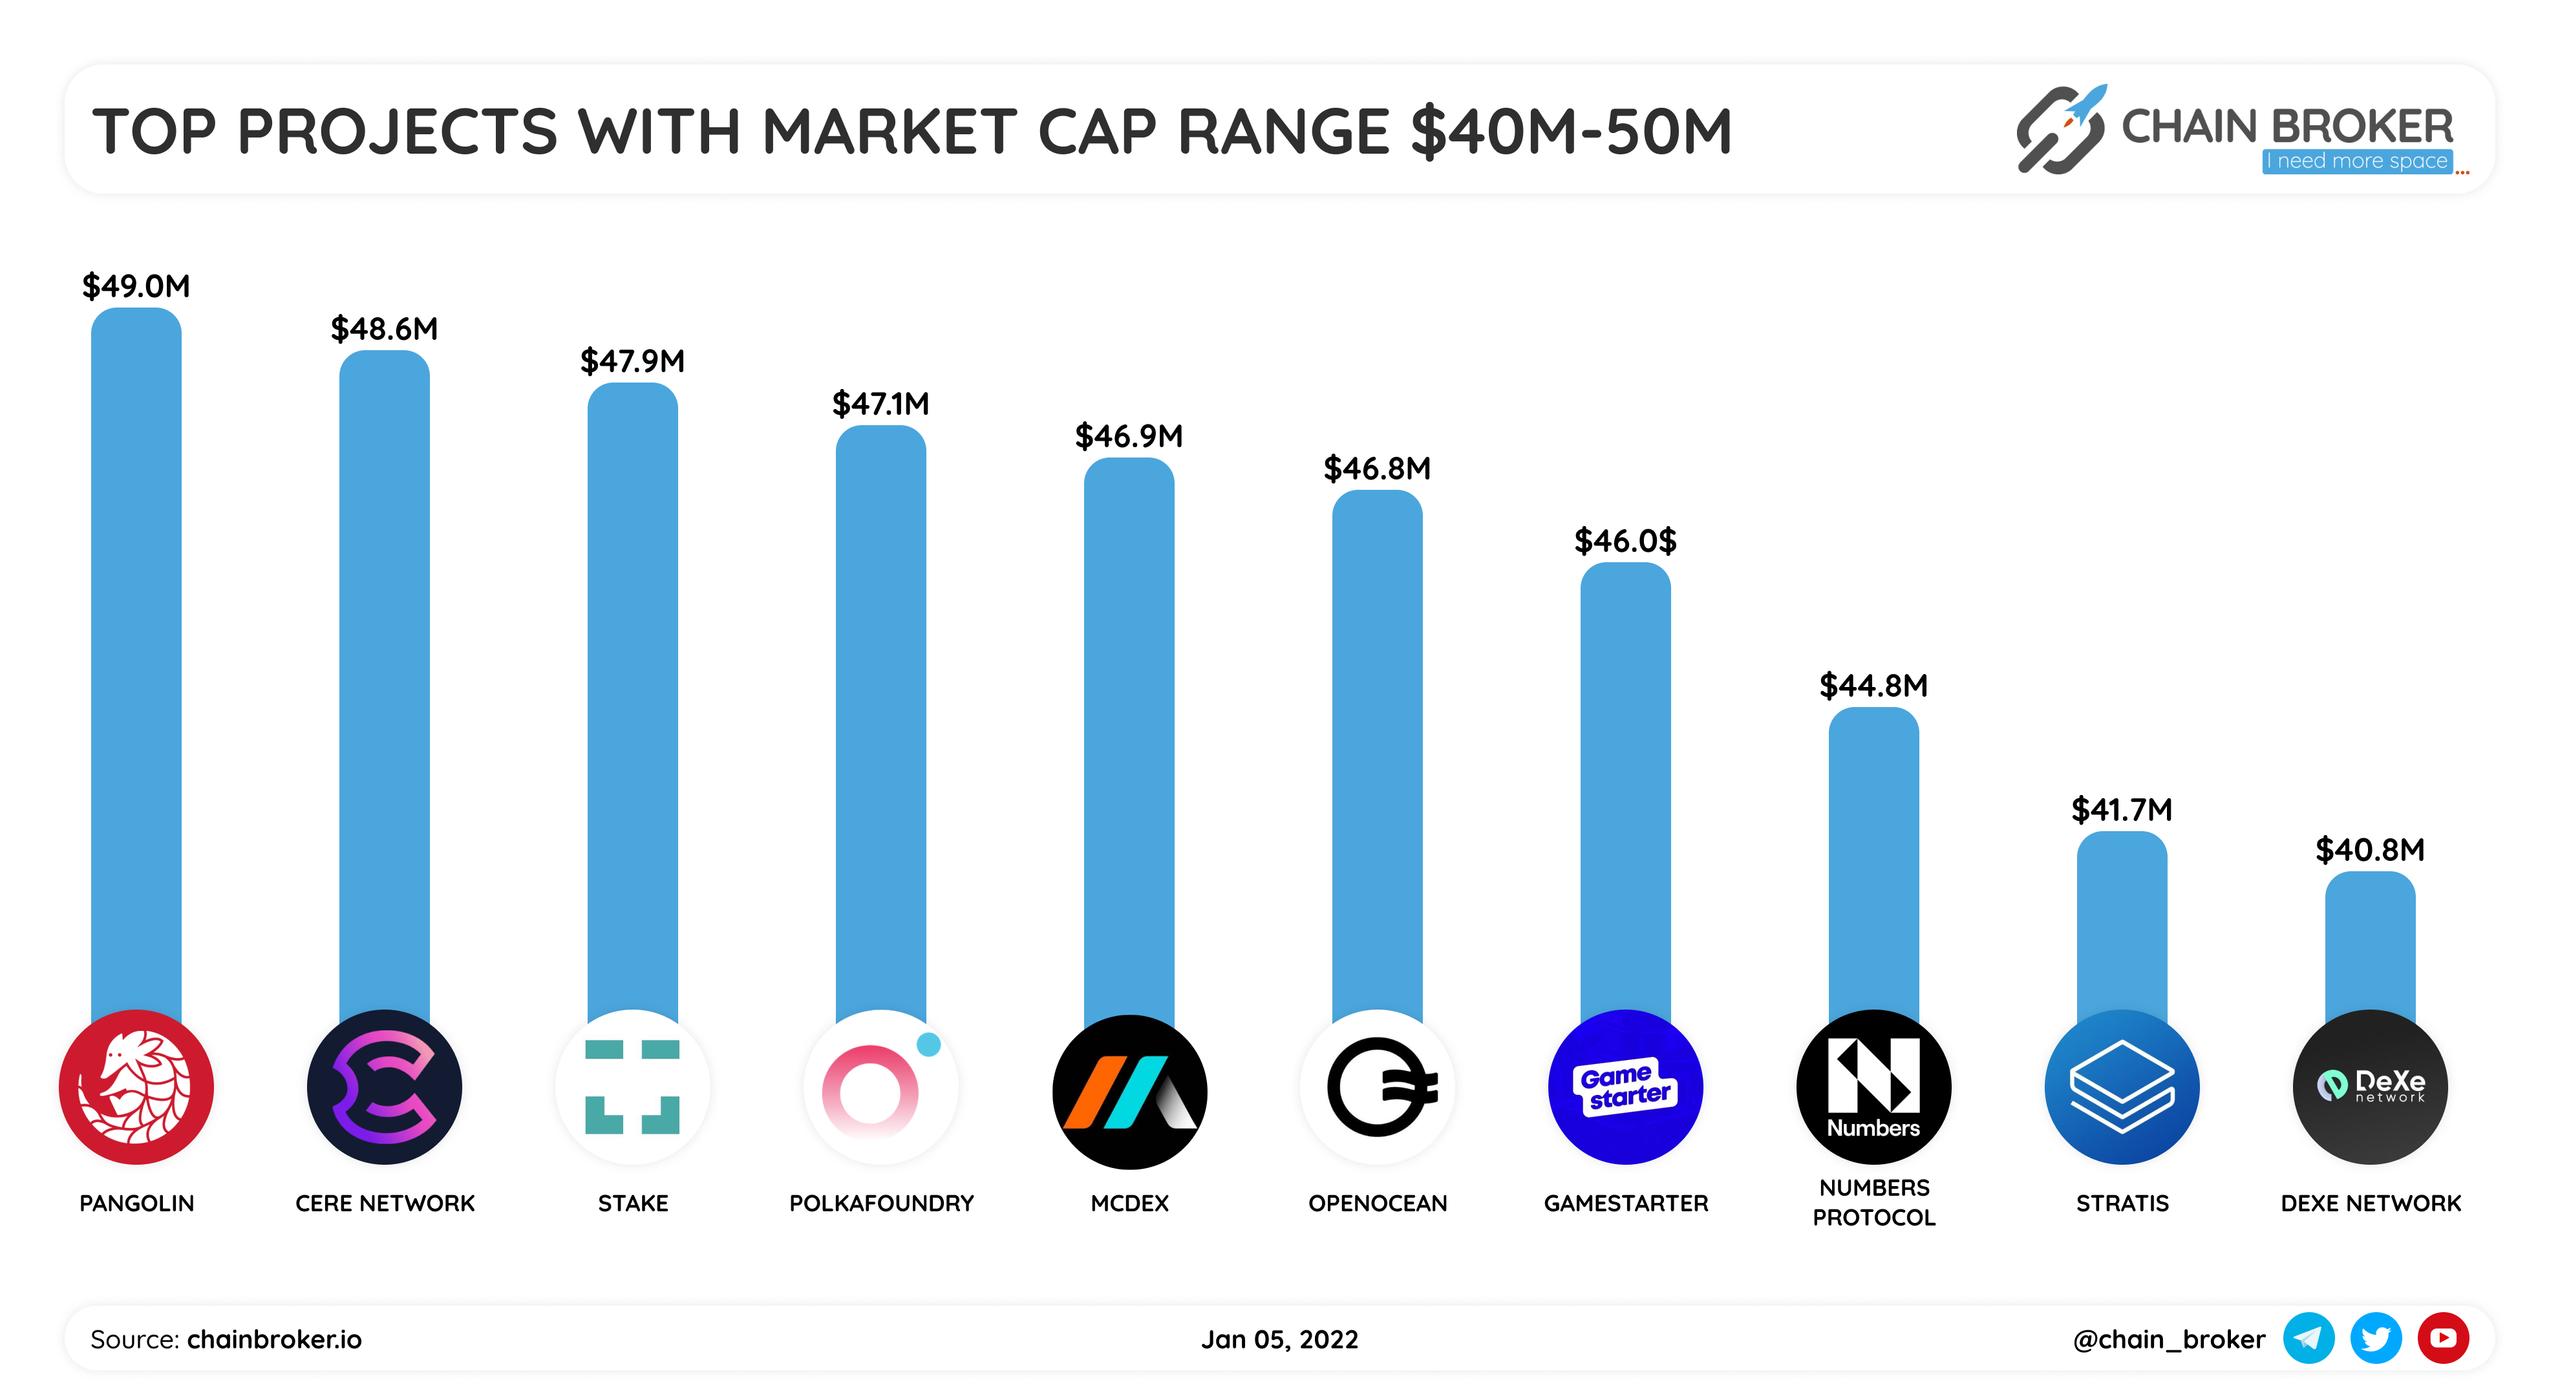 Top projects with market cap range $40M-$50M